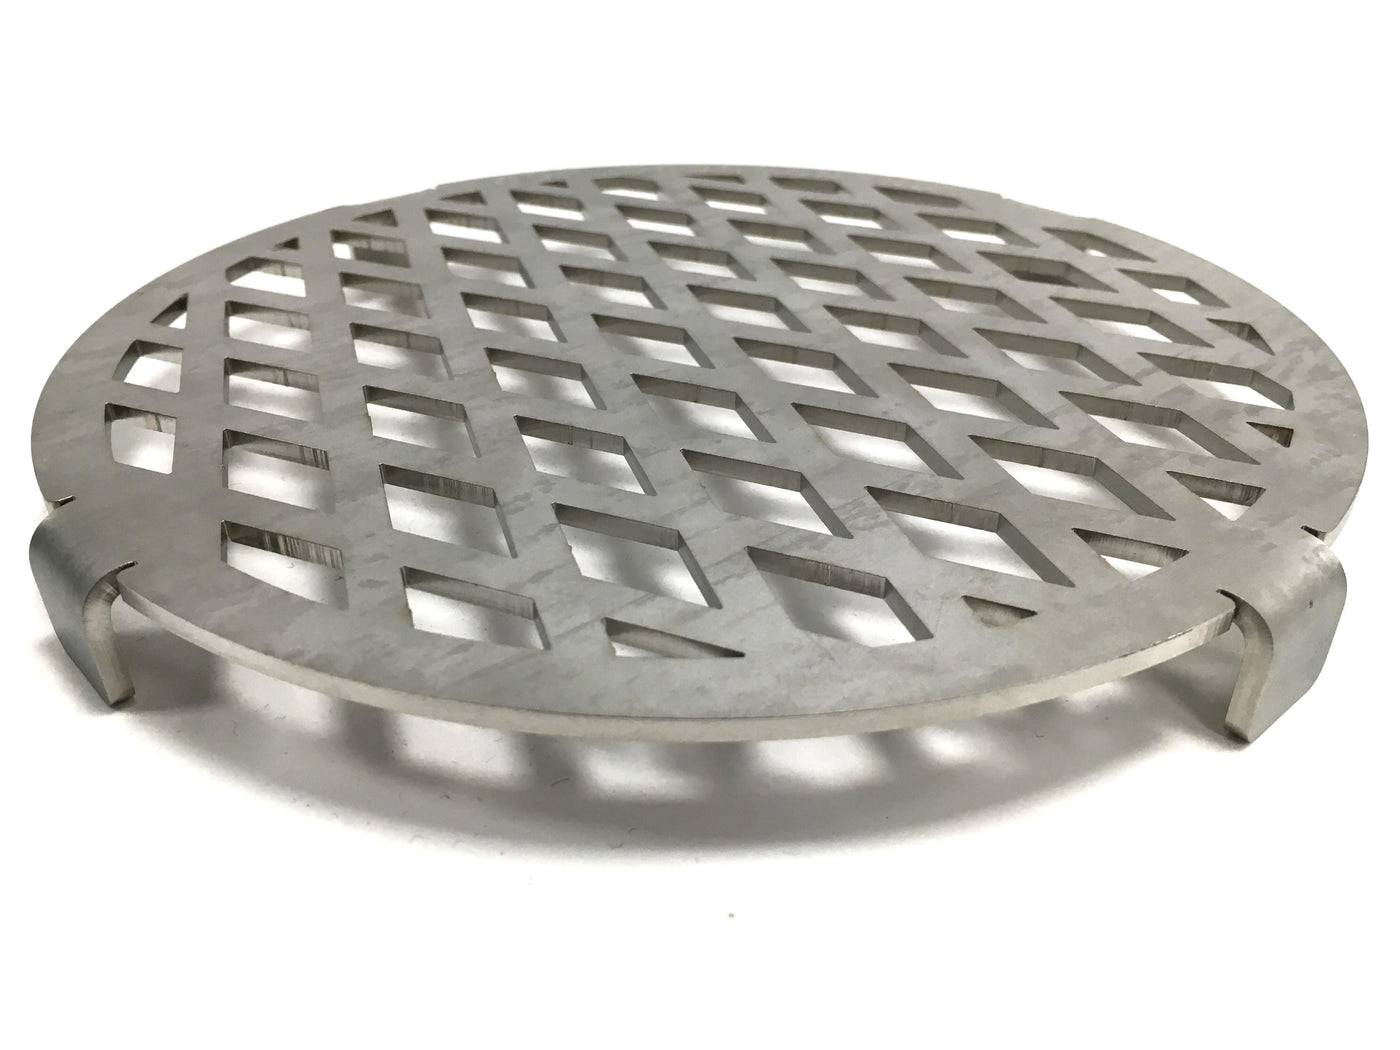 Chimney Grill Grate